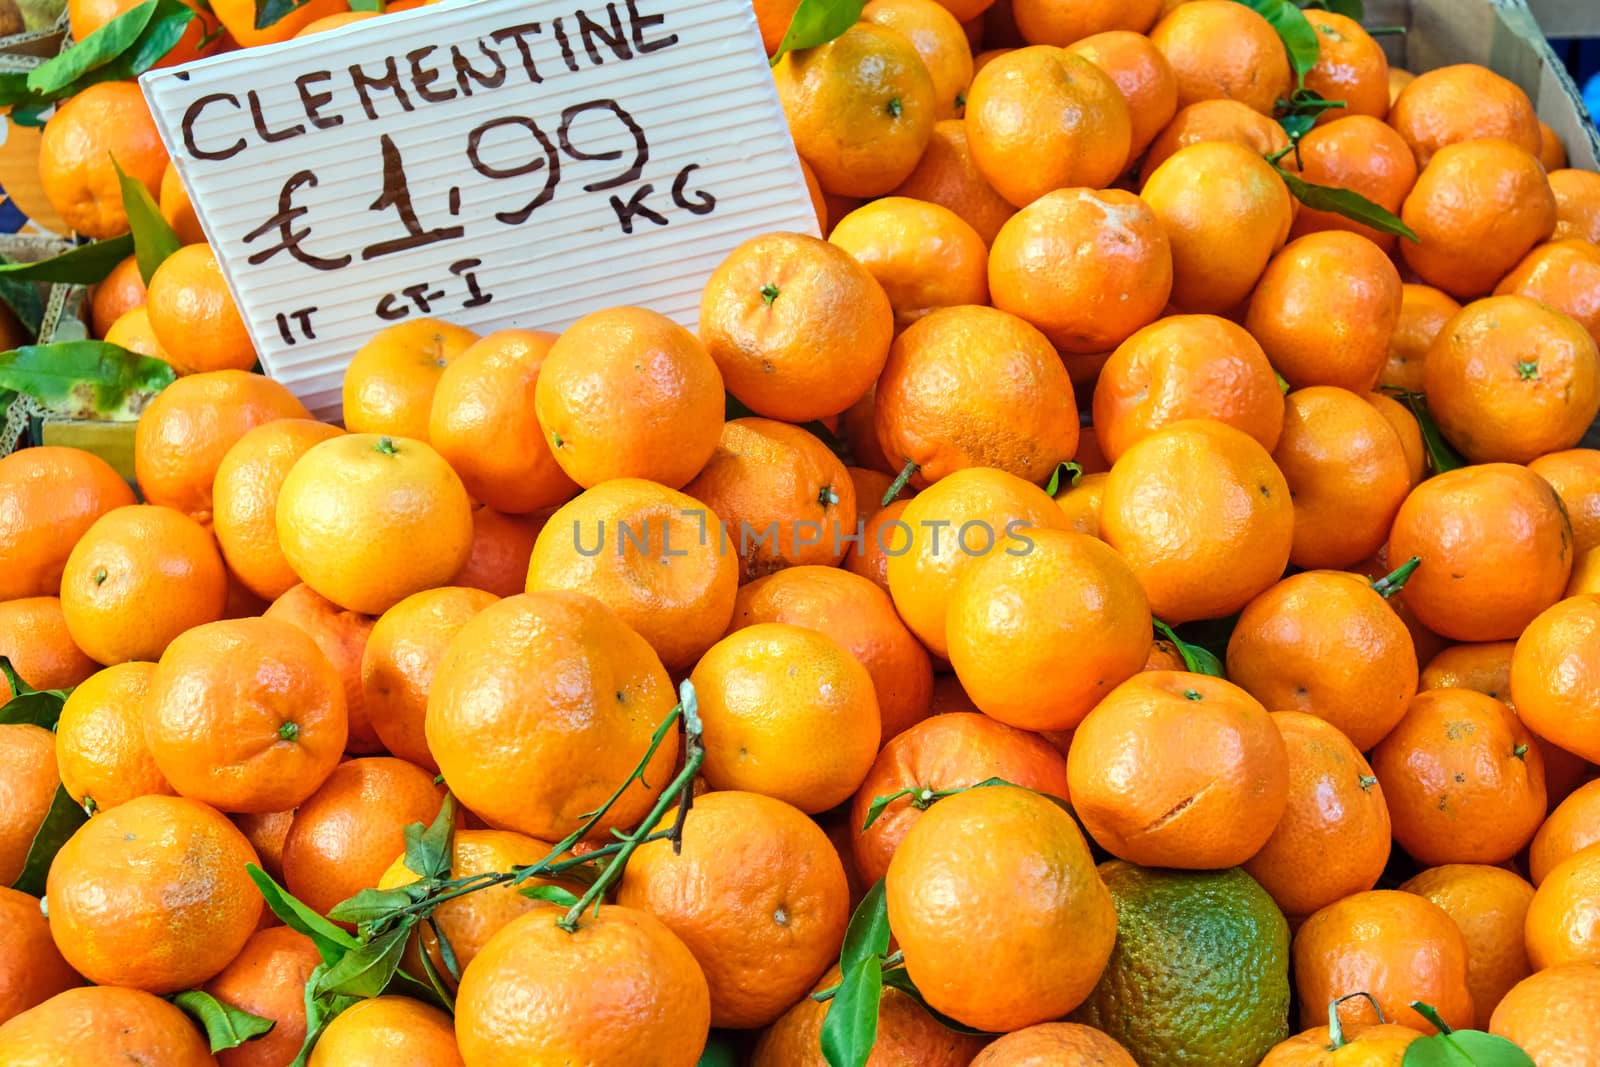 A pile of clementines for sale at a market